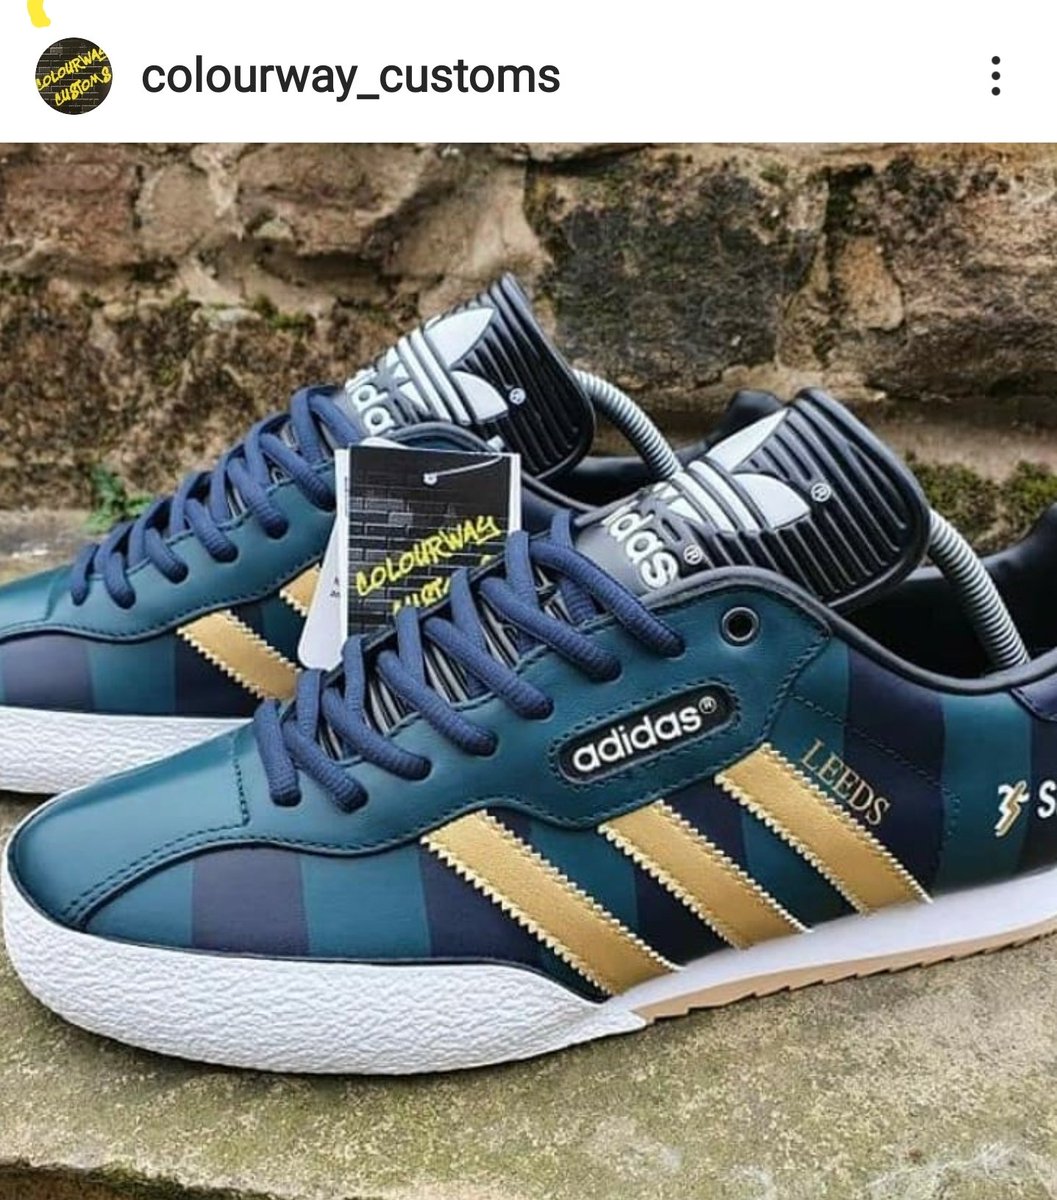 Just seen these on insta